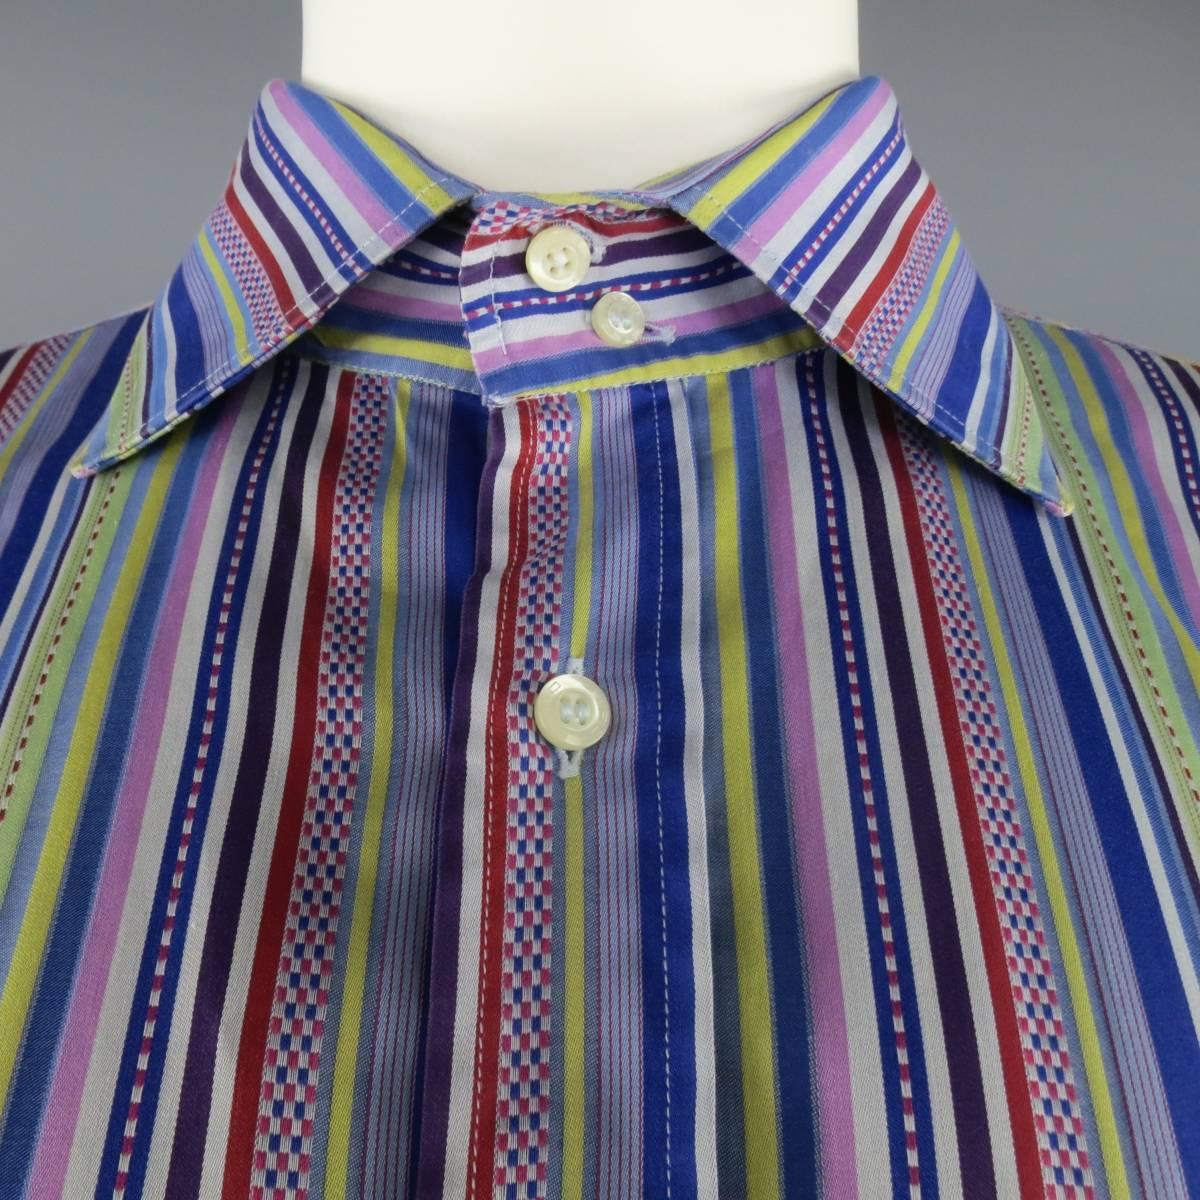 ETRO dress shirt in a multi color striped pattern cotton with hues of  blue & purple with a pointed spread collar. Made in Italy.
 
Good Pre-Owned Condition.
Marked: IT 46
 
Measurements:
 
Shoulder: 20 in.
Chest: 56 in.
Sleeve: 25.5 in.
Length: 35